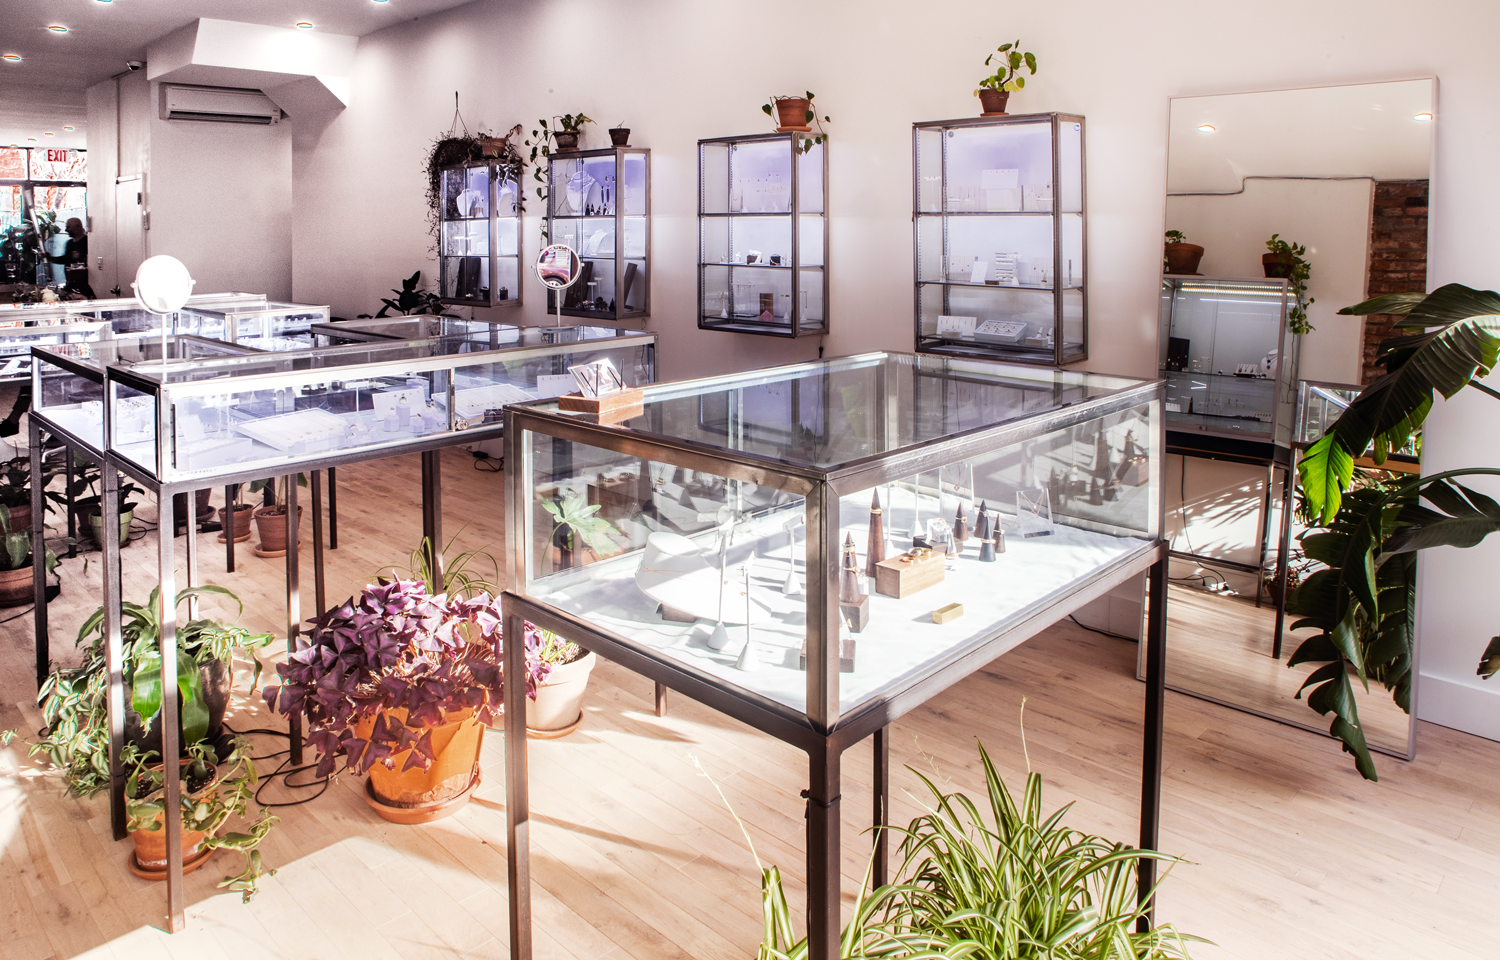 Our Williamsburg, Brooklyn gallery showcasing our jewelry cases in the sunlight amongst many plants.